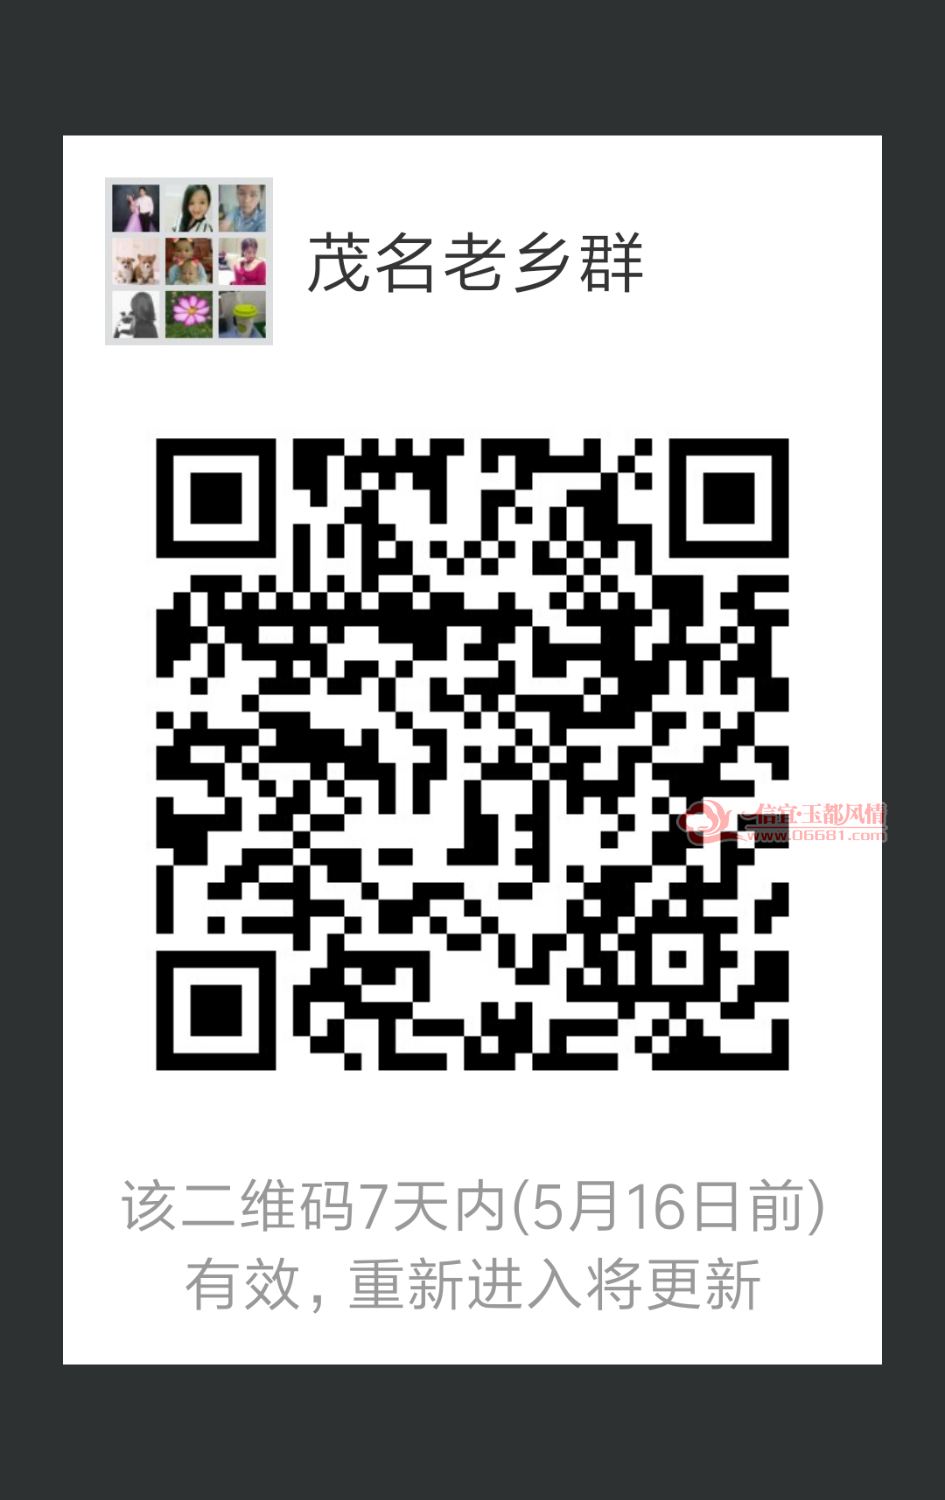 mmqrcode1525830885528.png